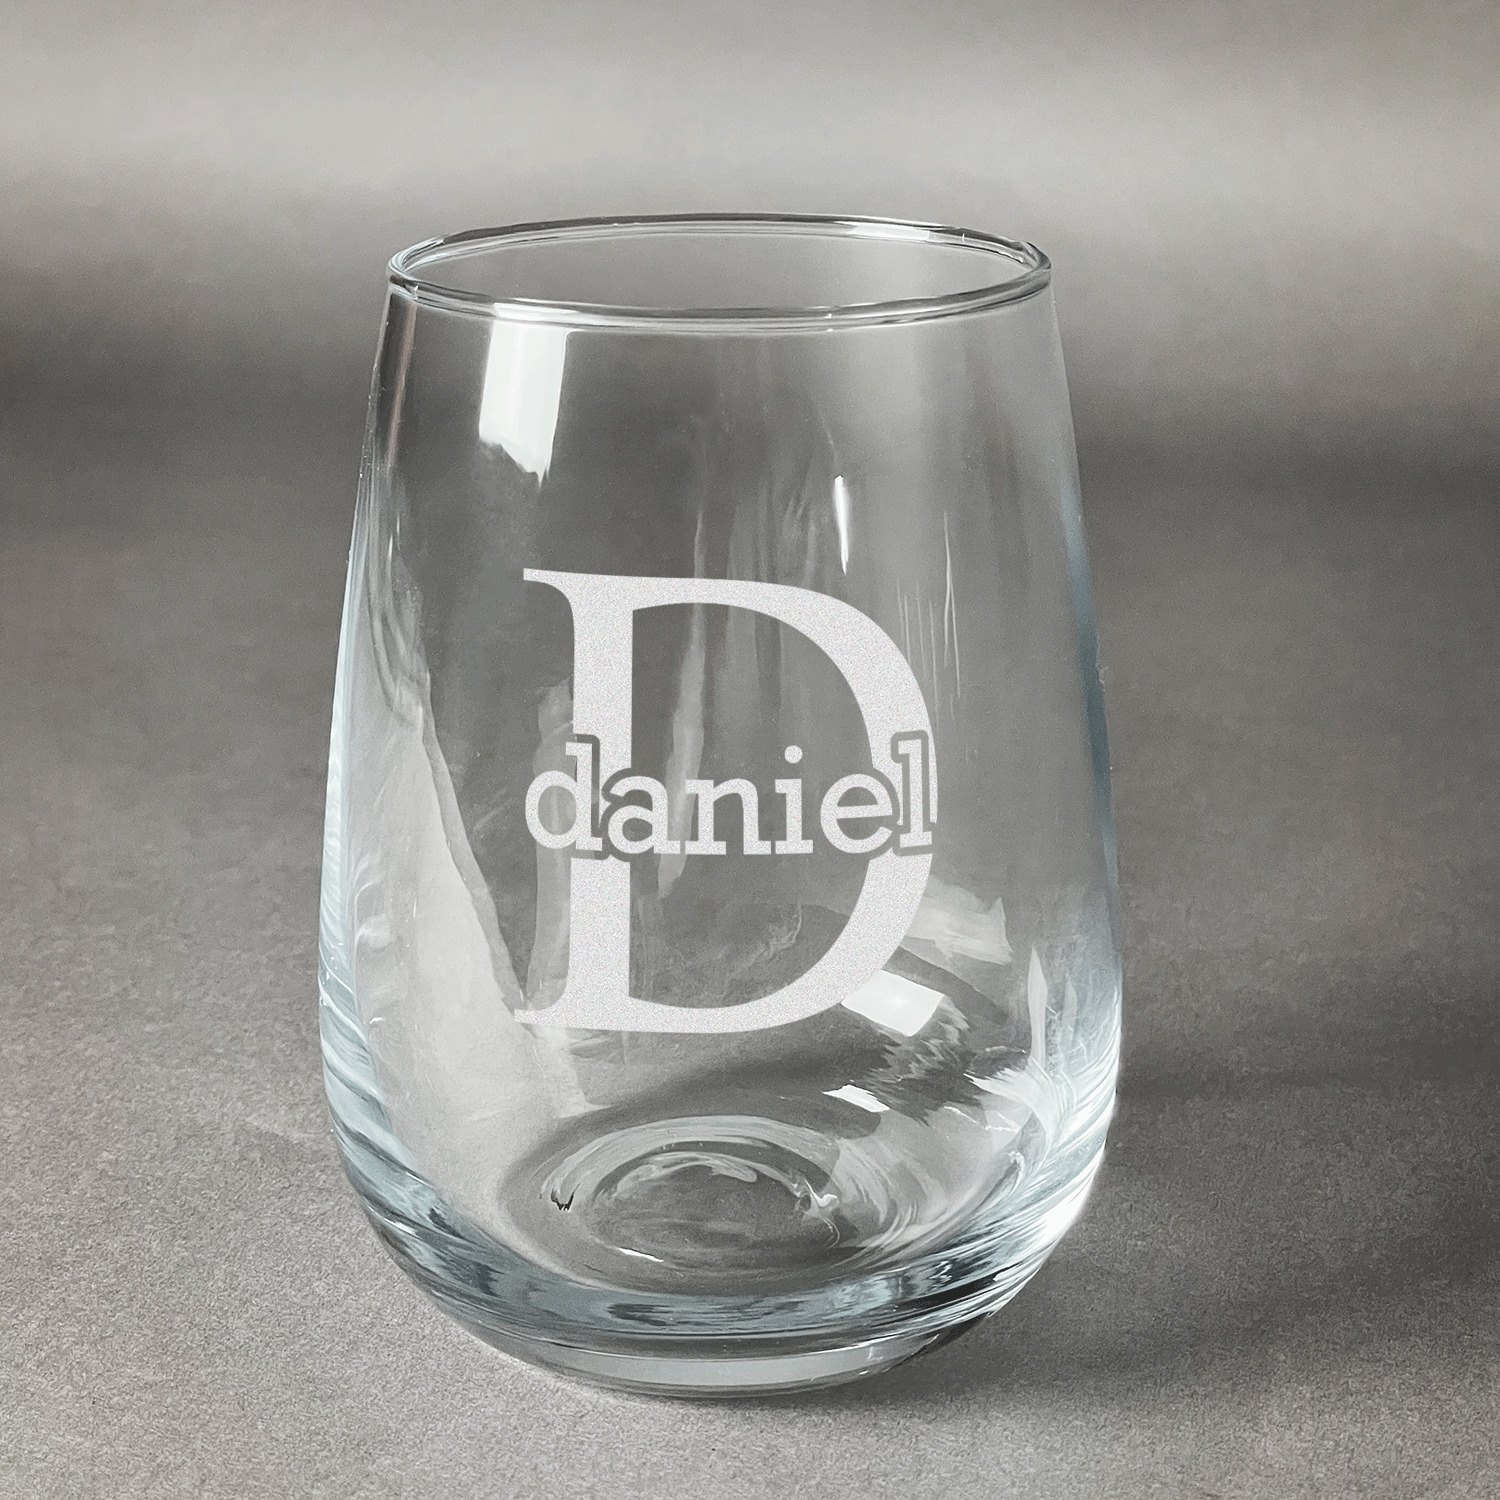 https://www.youcustomizeit.com/common/MAKE/837778/Name-Initial-for-Guys-Stemless-Wine-Glass-Front-Approval.jpg?lm=1682544394